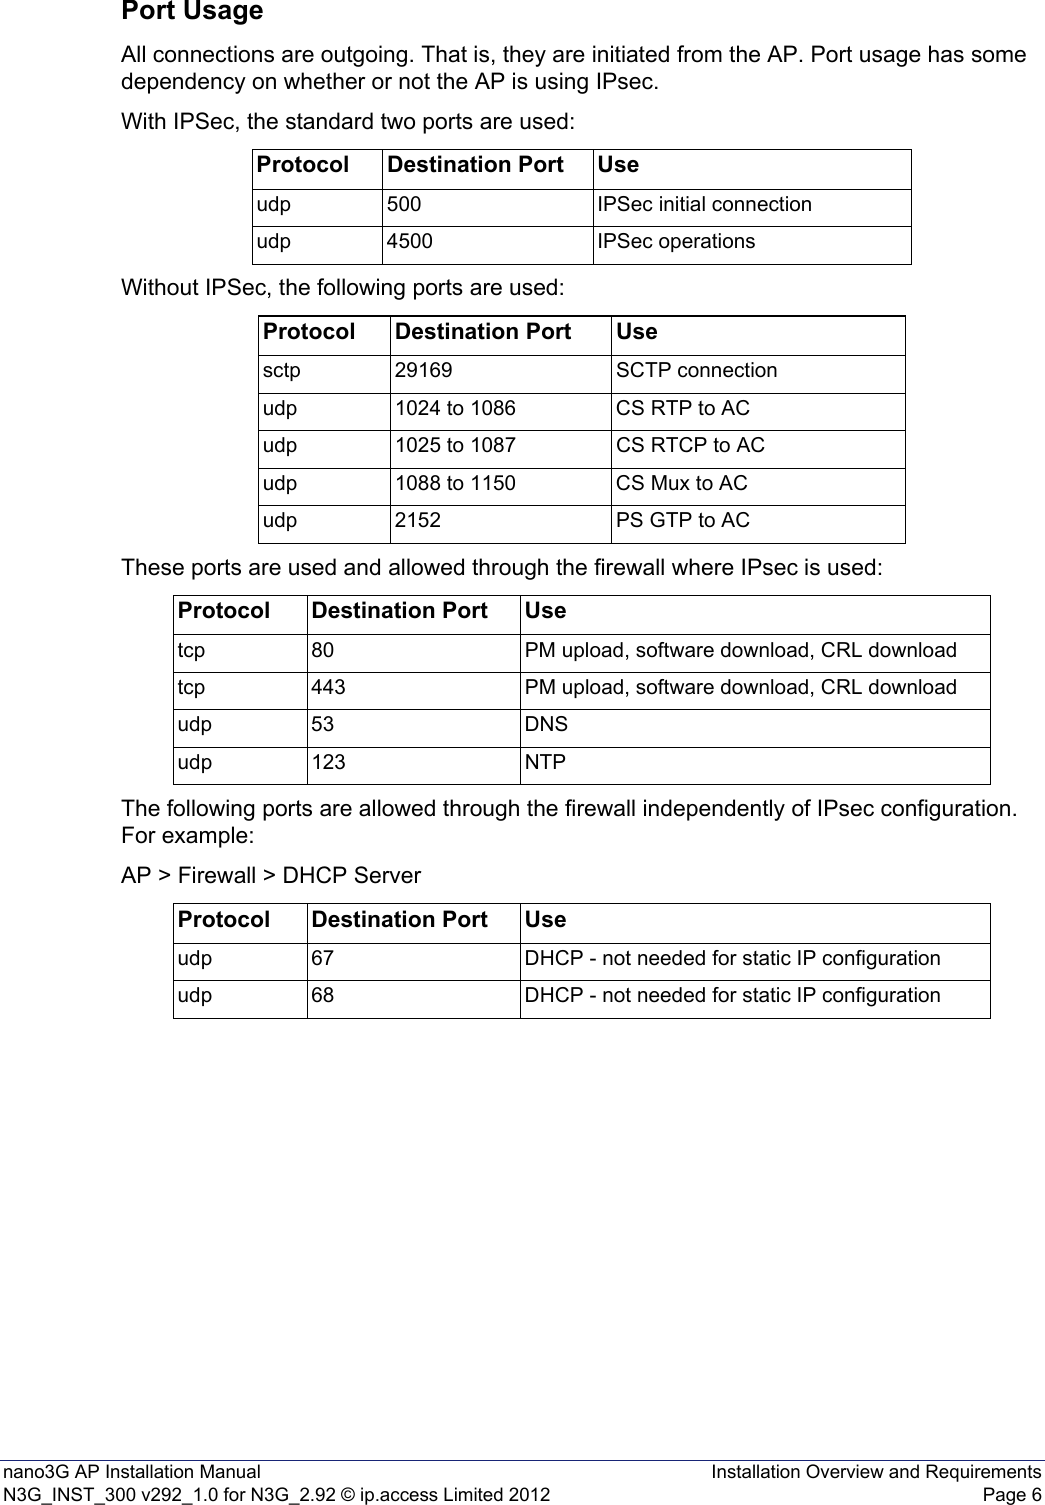 nano3G AP Installation Manual Installation Overview and RequirementsN3G_INST_300 v292_1.0 for N3G_2.92 © ip.access Limited 2012 Page 6Port UsageAll connections are outgoing. That is, they are initiated from the AP. Port usage has some dependency on whether or not the AP is using IPsec.With IPSec, the standard two ports are used:Without IPSec, the following ports are used:These ports are used and allowed through the firewall where IPsec is used:The following ports are allowed through the firewall independently of IPsec configuration. For example:AP &gt; Firewall &gt; DHCP ServerProtocol Destination Port Useudp 500 IPSec initial connectionudp 4500 IPSec operationsProtocol Destination Port Usesctp 29169 SCTP connectionudp 1024 to 1086 CS RTP to ACudp 1025 to 1087 CS RTCP to ACudp 1088 to 1150 CS Mux to ACudp 2152 PS GTP to ACProtocol Destination Port Usetcp 80 PM upload, software download, CRL downloadtcp 443 PM upload, software download, CRL downloadudp 53 DNSudp 123 NTPProtocol Destination Port Useudp 67 DHCP - not needed for static IP configurationudp 68 DHCP - not needed for static IP configuration